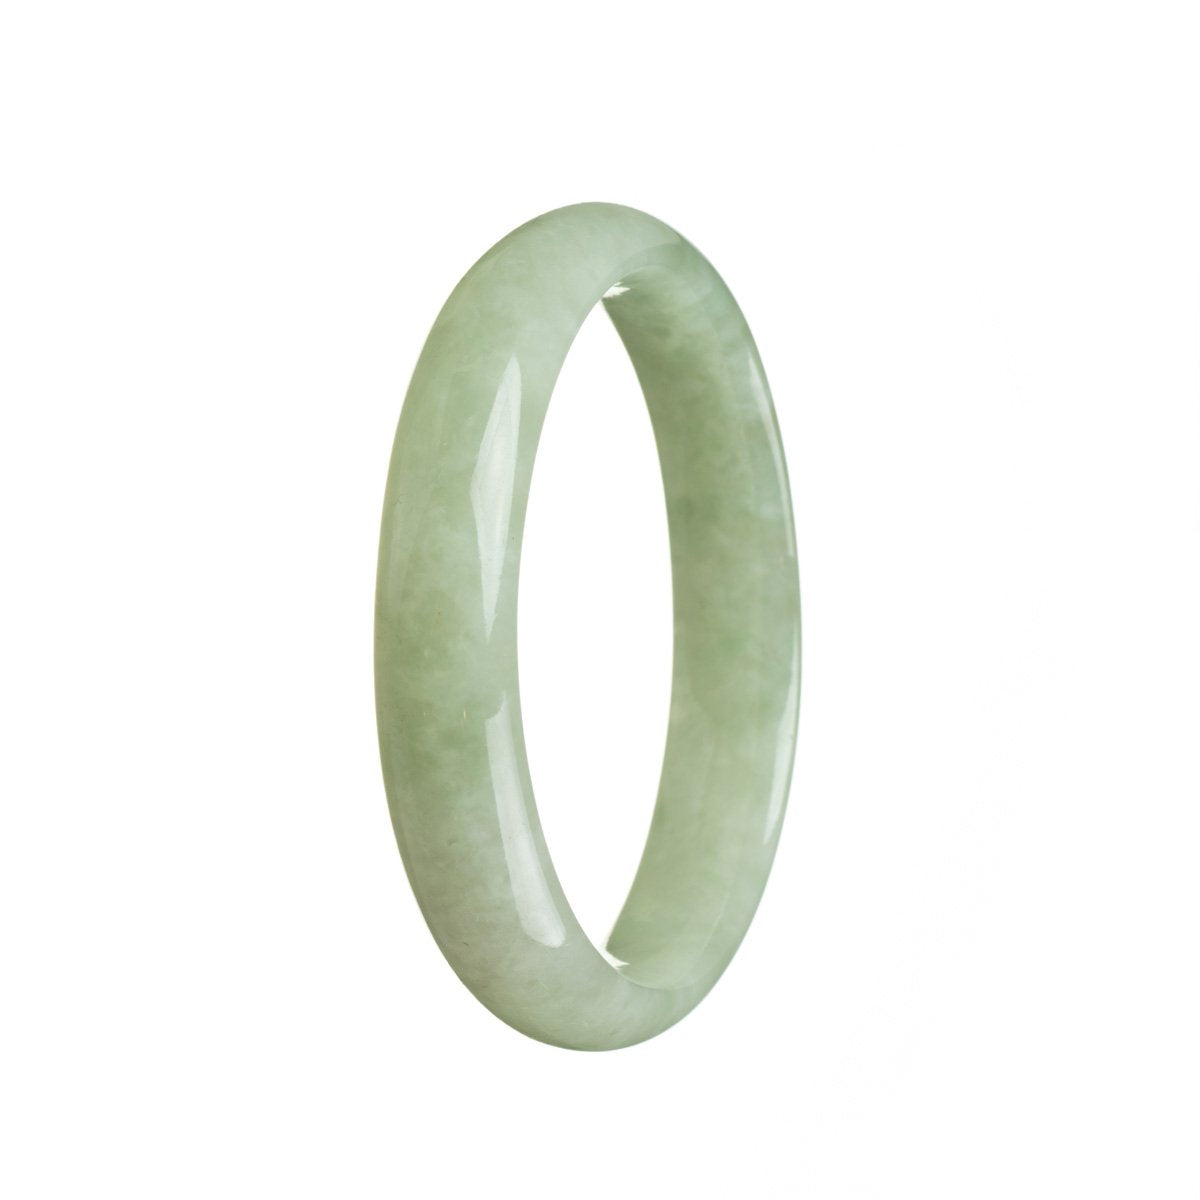 A close-up image of a beautiful, high-quality olive green jade bangle bracelet with a half moon shape. The bangle has a smooth and polished surface, showcasing the natural beauty and vibrant color of the jade. The bracelet is 57mm in size and is a real grade A piece, displaying its exquisite craftsmanship and elegance. From MAYS™.